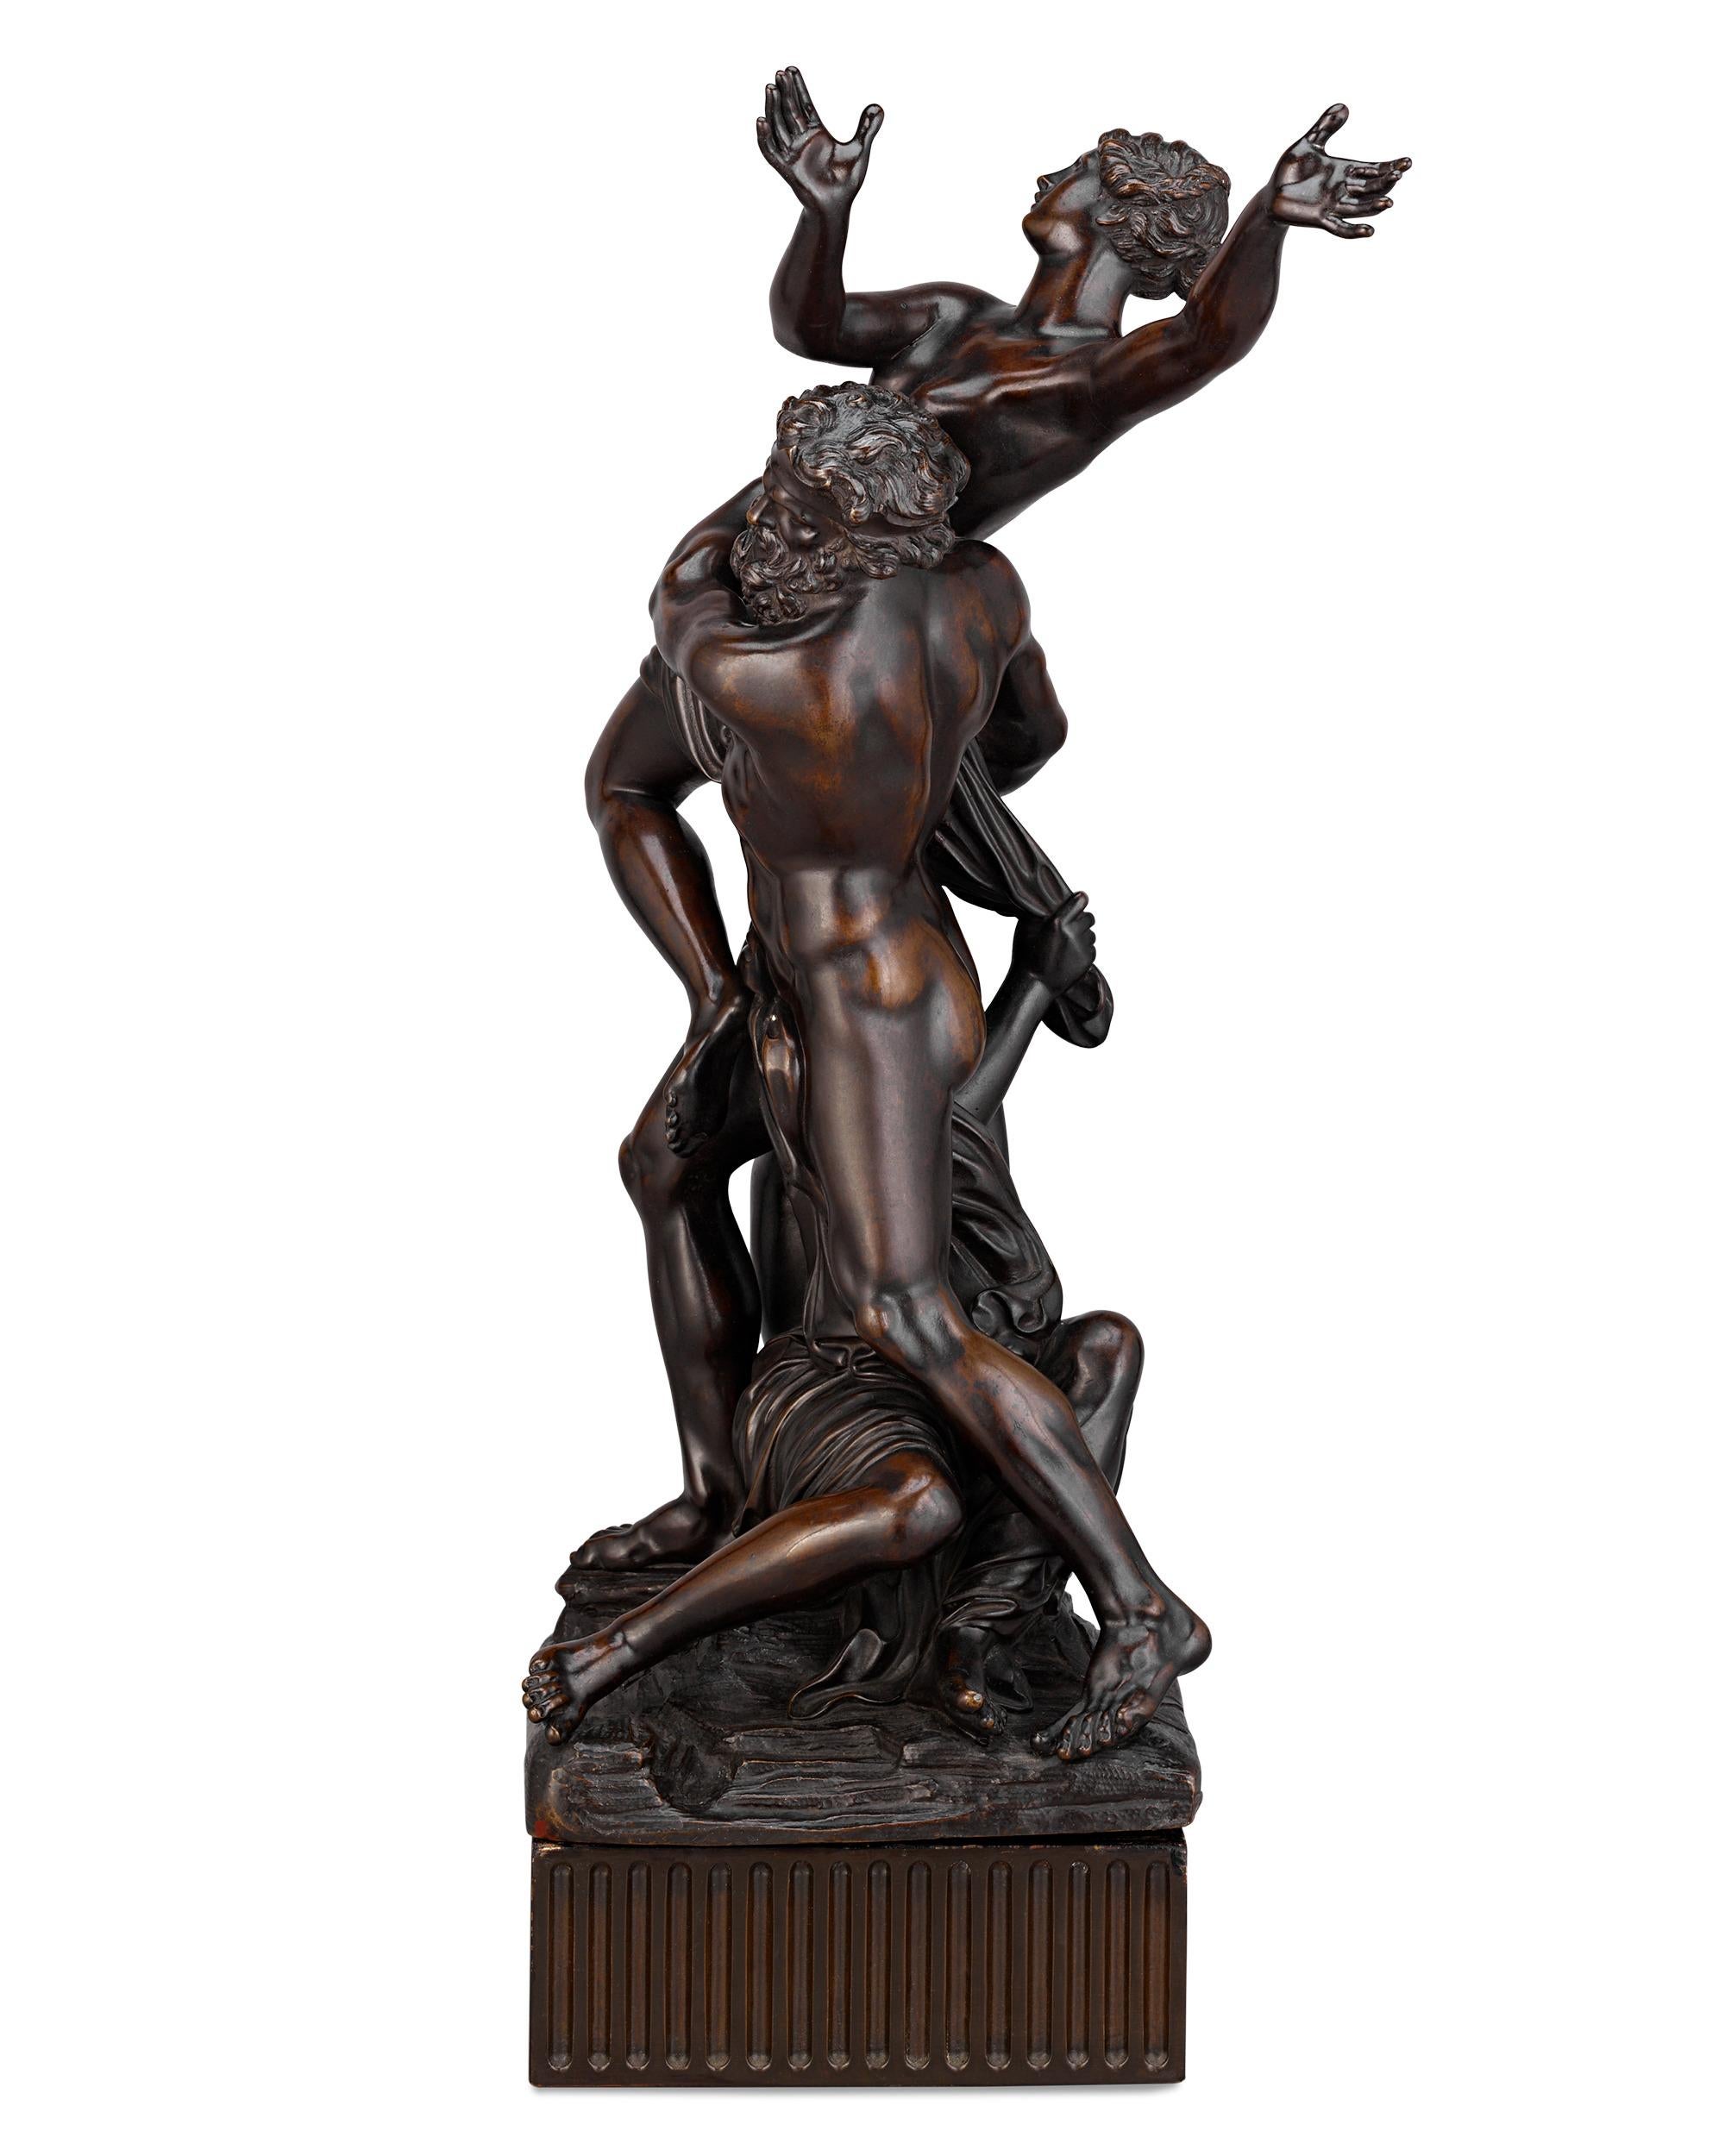 After François Girardon
1628-1715  French

Pluto Abducting Proserpine

Bronze

This High Baroque period composition captures the famed narrative of Pluto and Proserpine from Roman mythology. The late 17th-century patinated bronze, created after